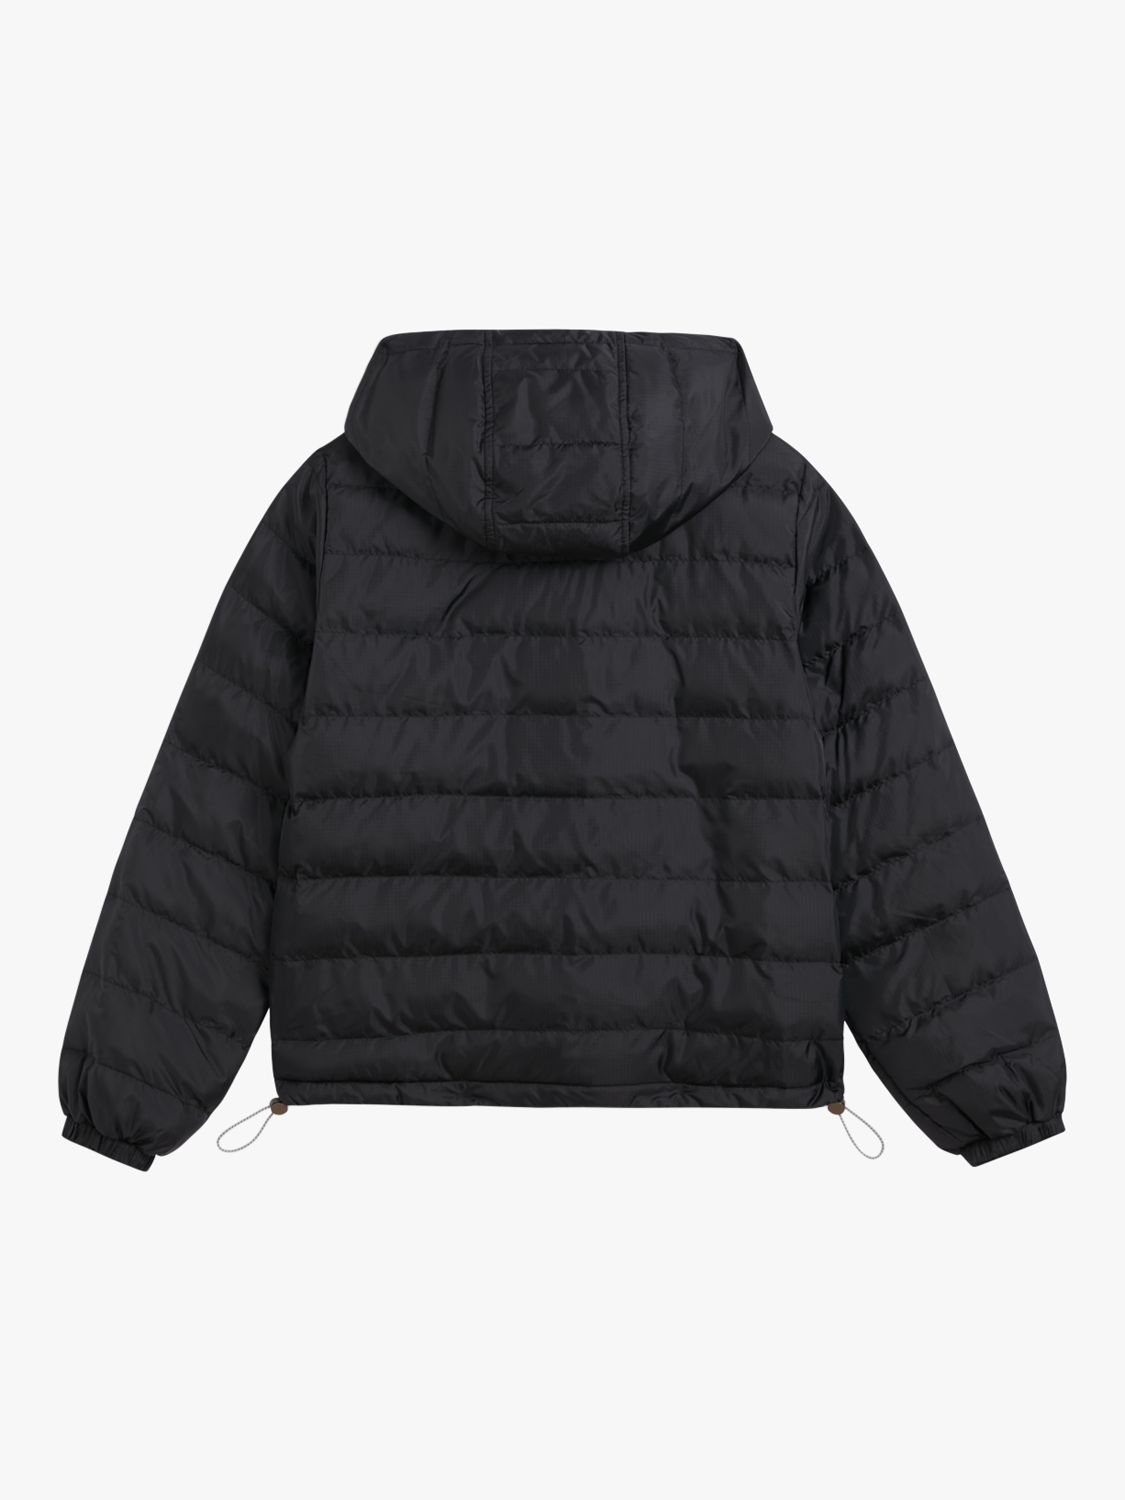 Levi's Edie Packable Quilted Jacket, Caviar at John Lewis & Partners